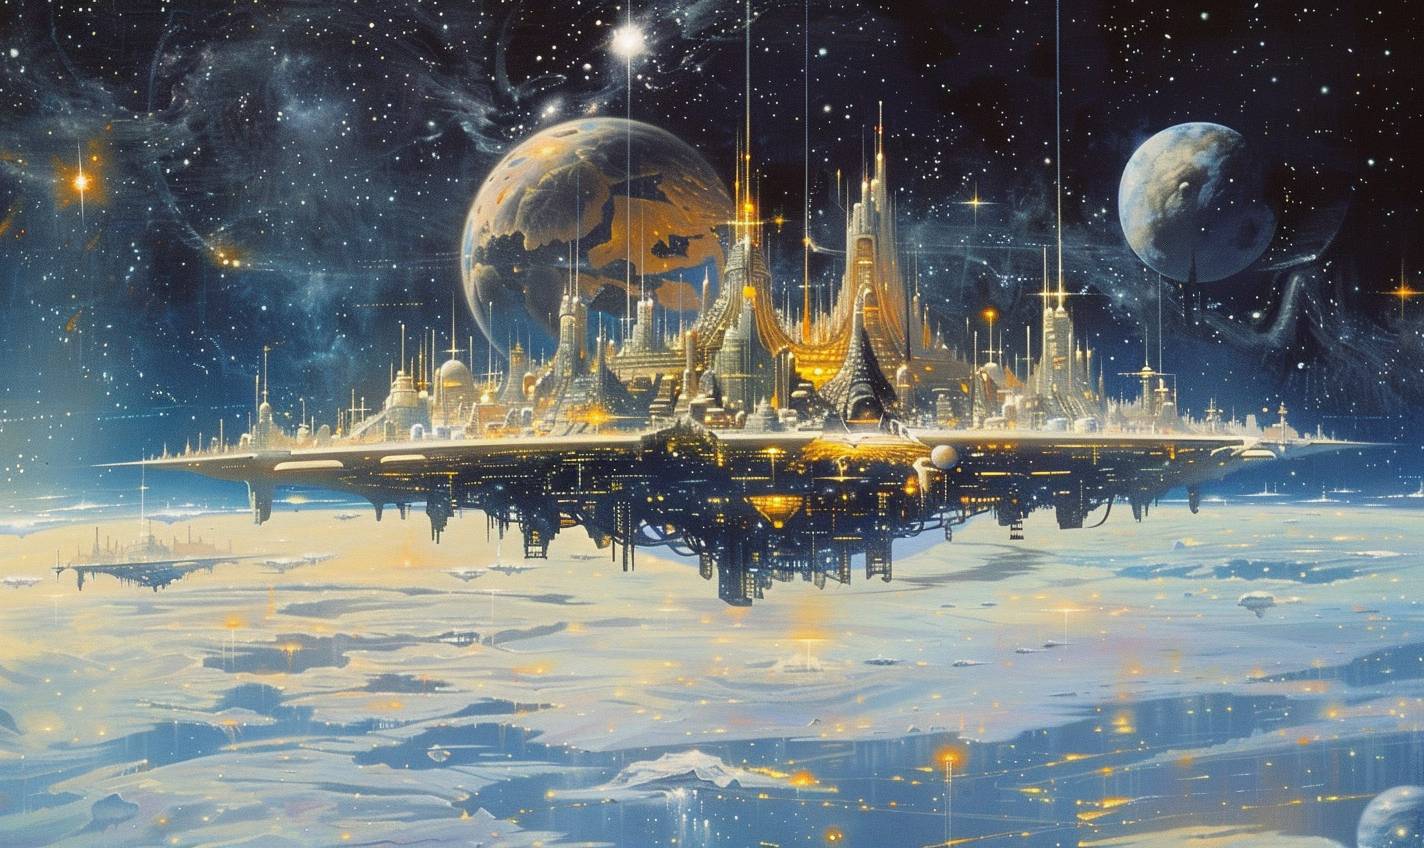 In style of Peter Elson, Celestial city floating among the stars